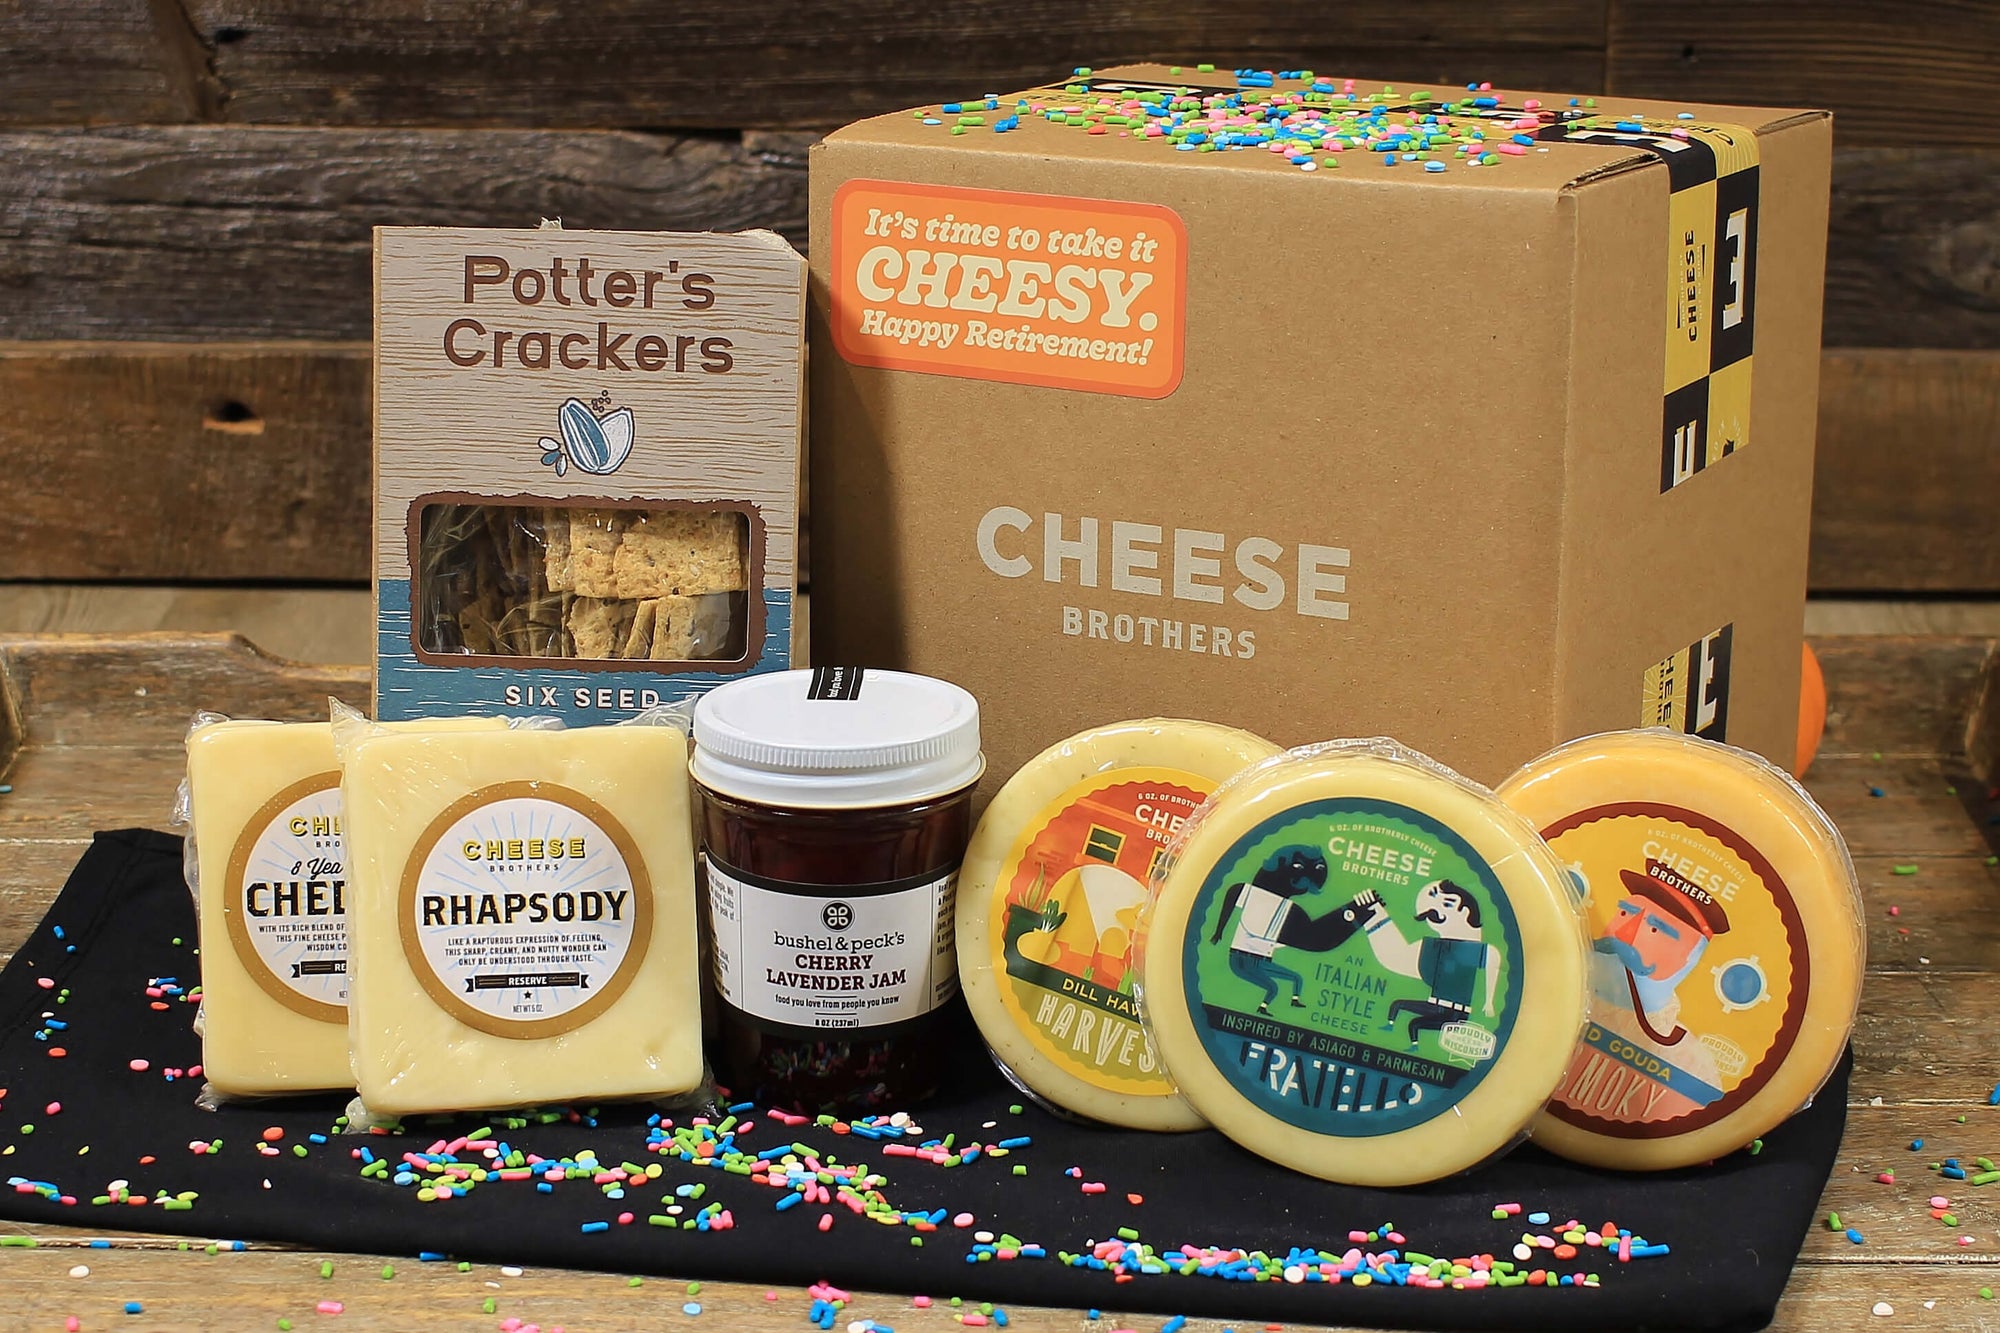 Arena Cheese, Wisconsin Cheese Curds, Gift Baskets